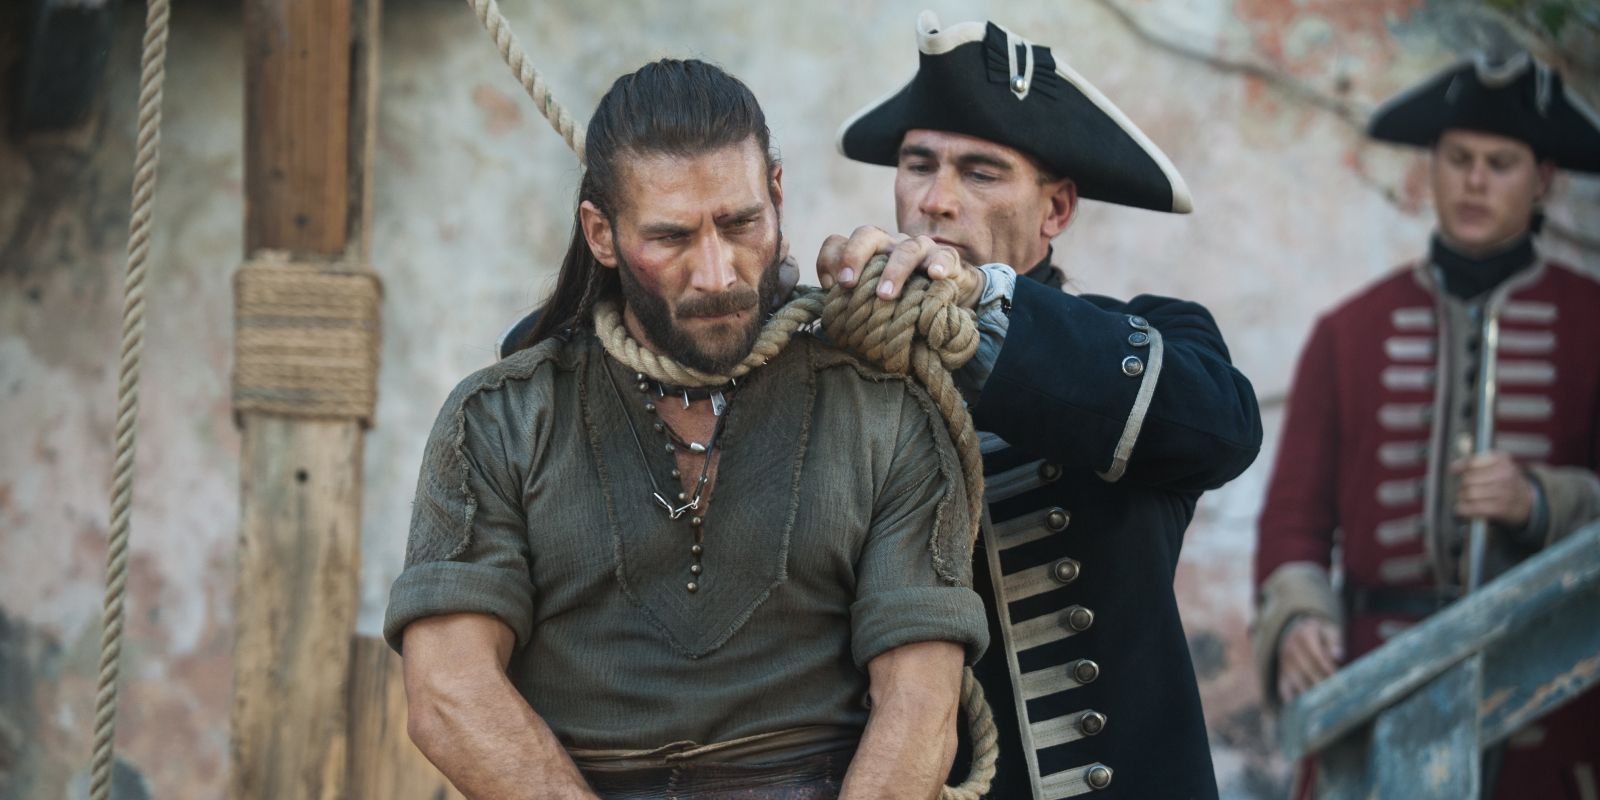 Someone places a noose around Charles Vane's neck at his execution in Black Sails season 3.